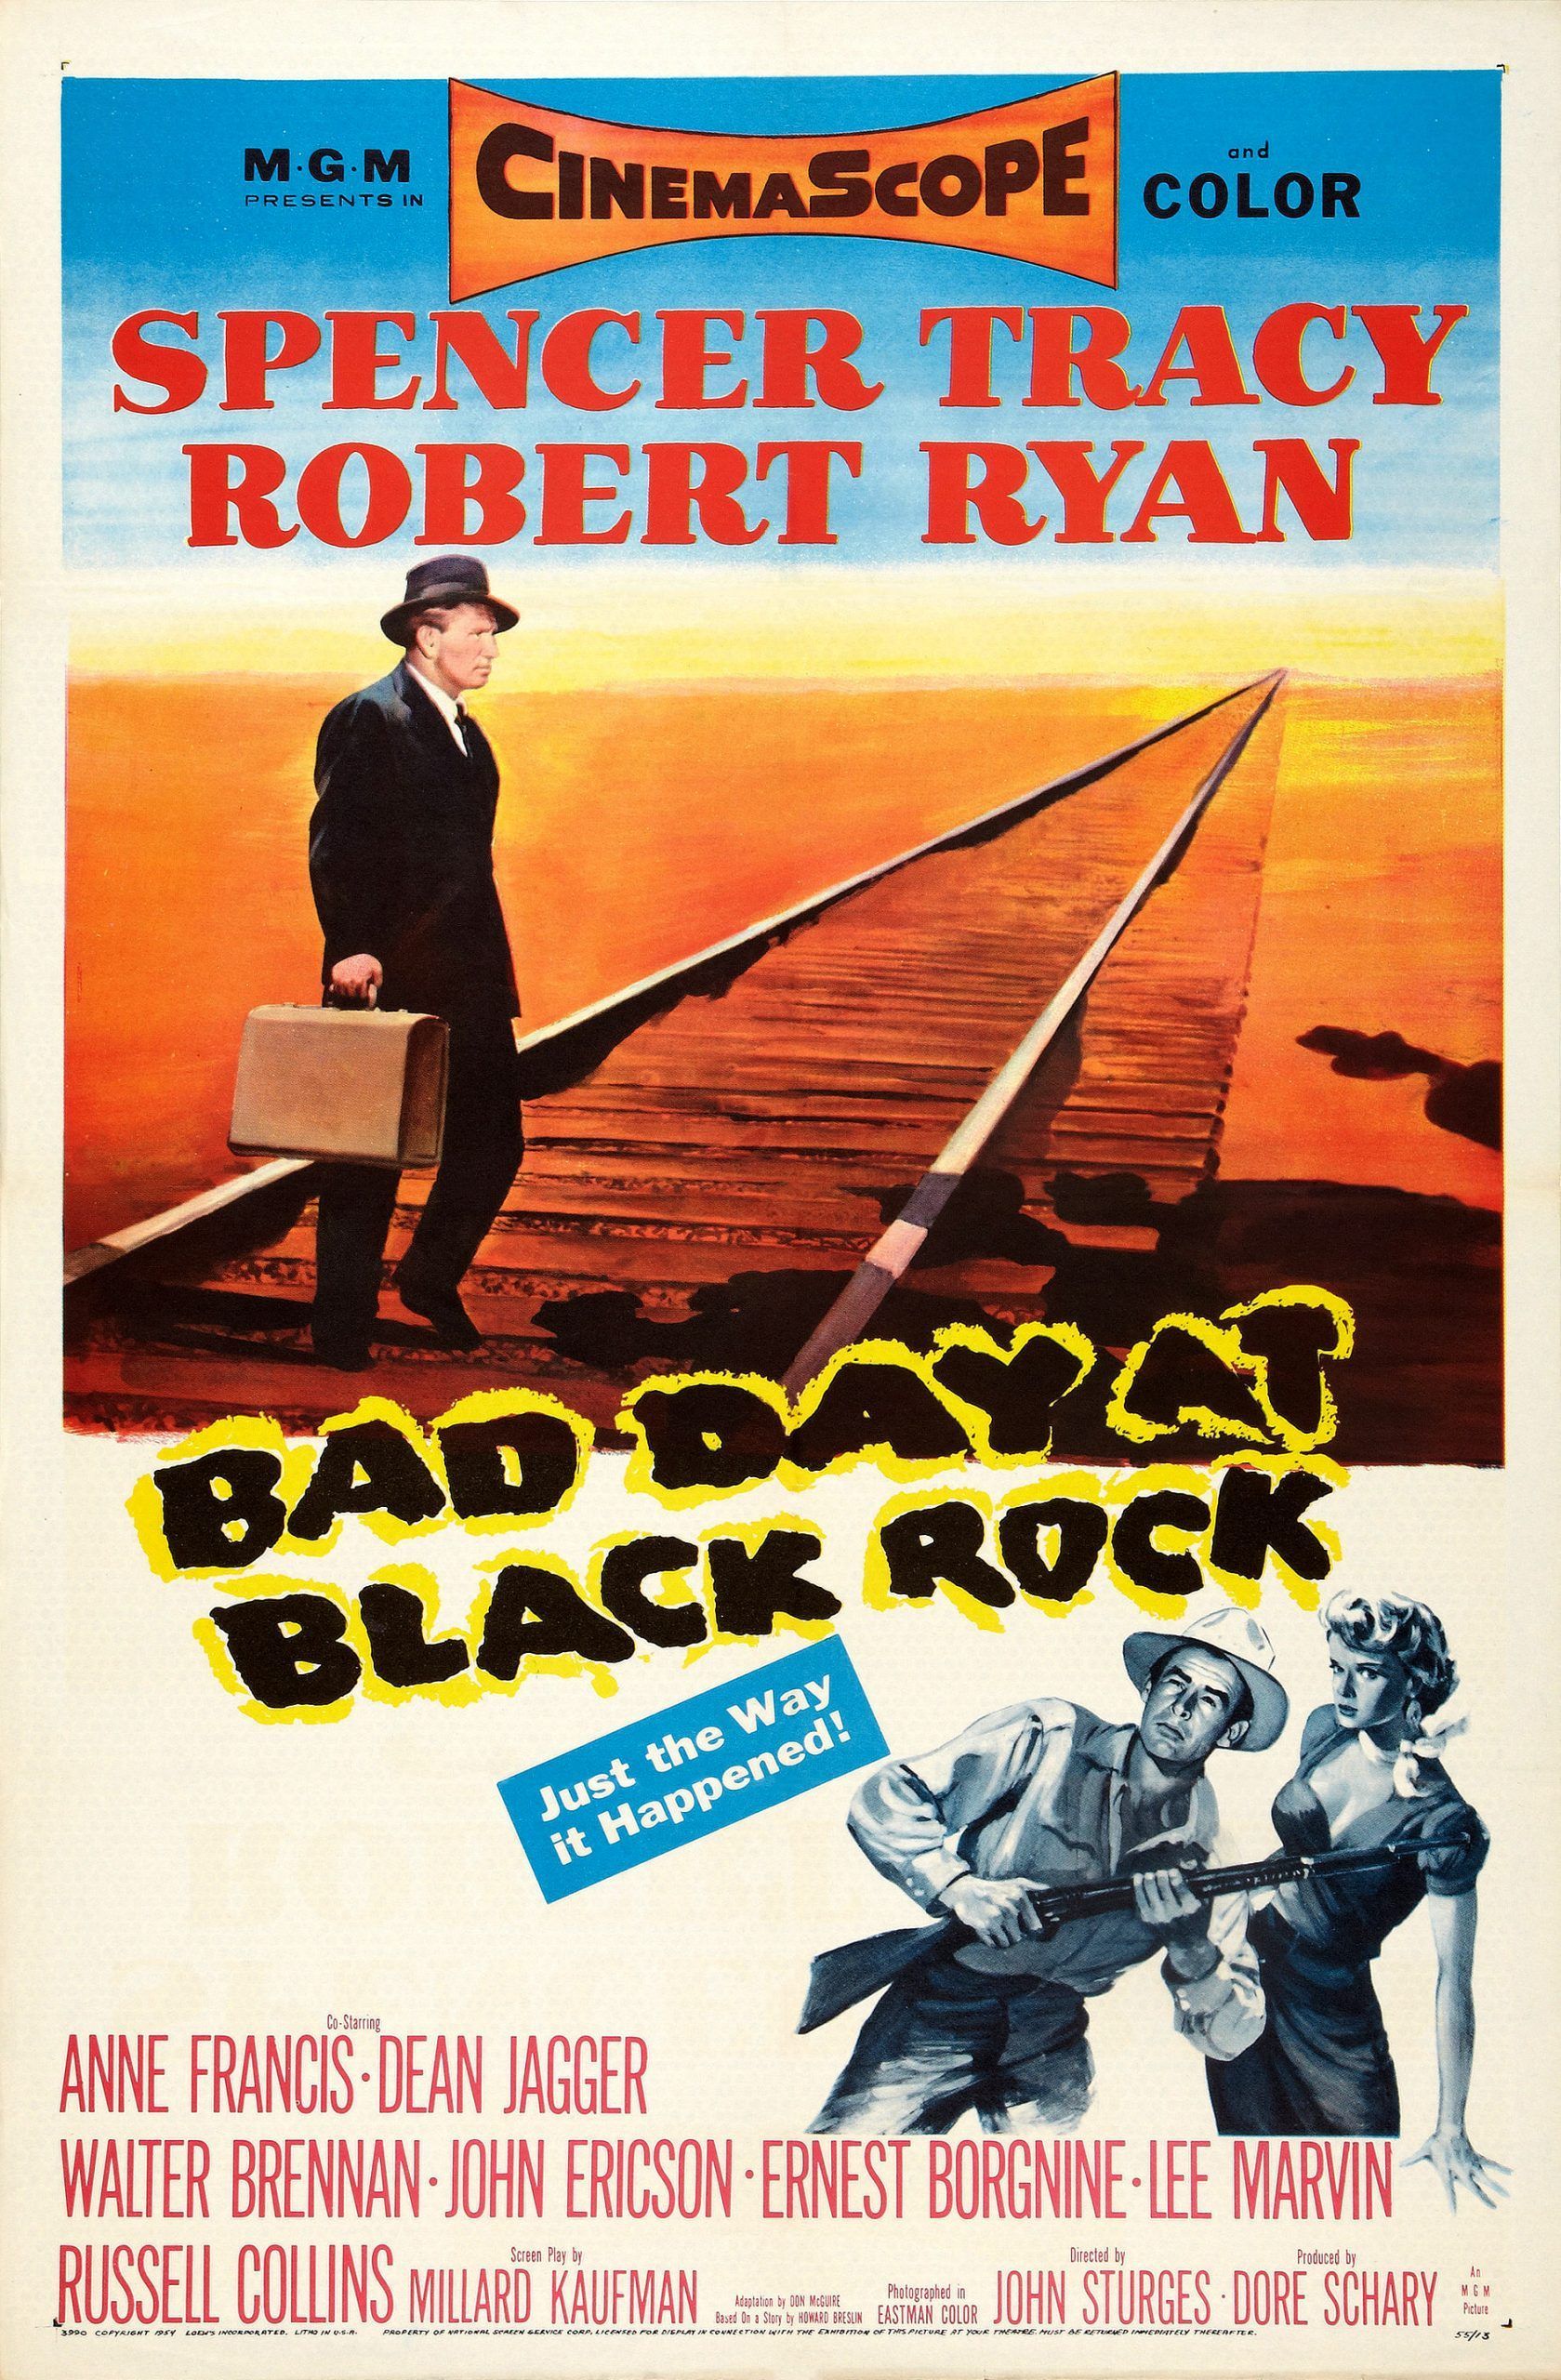 Buried in the Sand: On John Sturges’s “Bad Day at Black Rock” and Japanese America